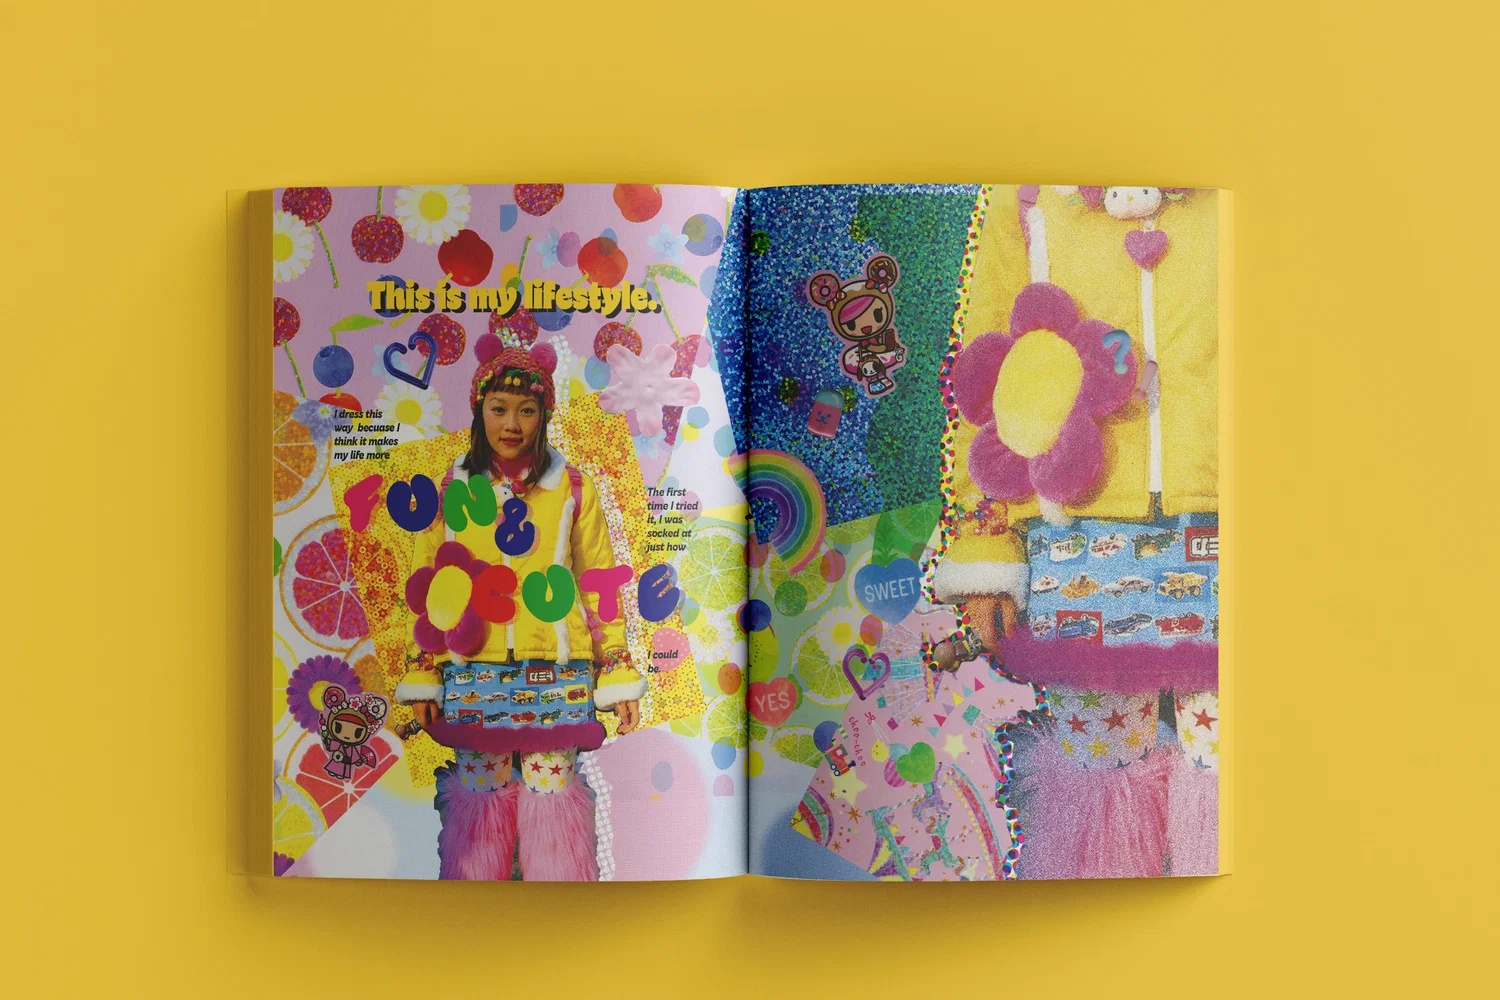 Image includes a Decora (Japanese subculture) zine. Background is yellow and features a laid out book in the center.